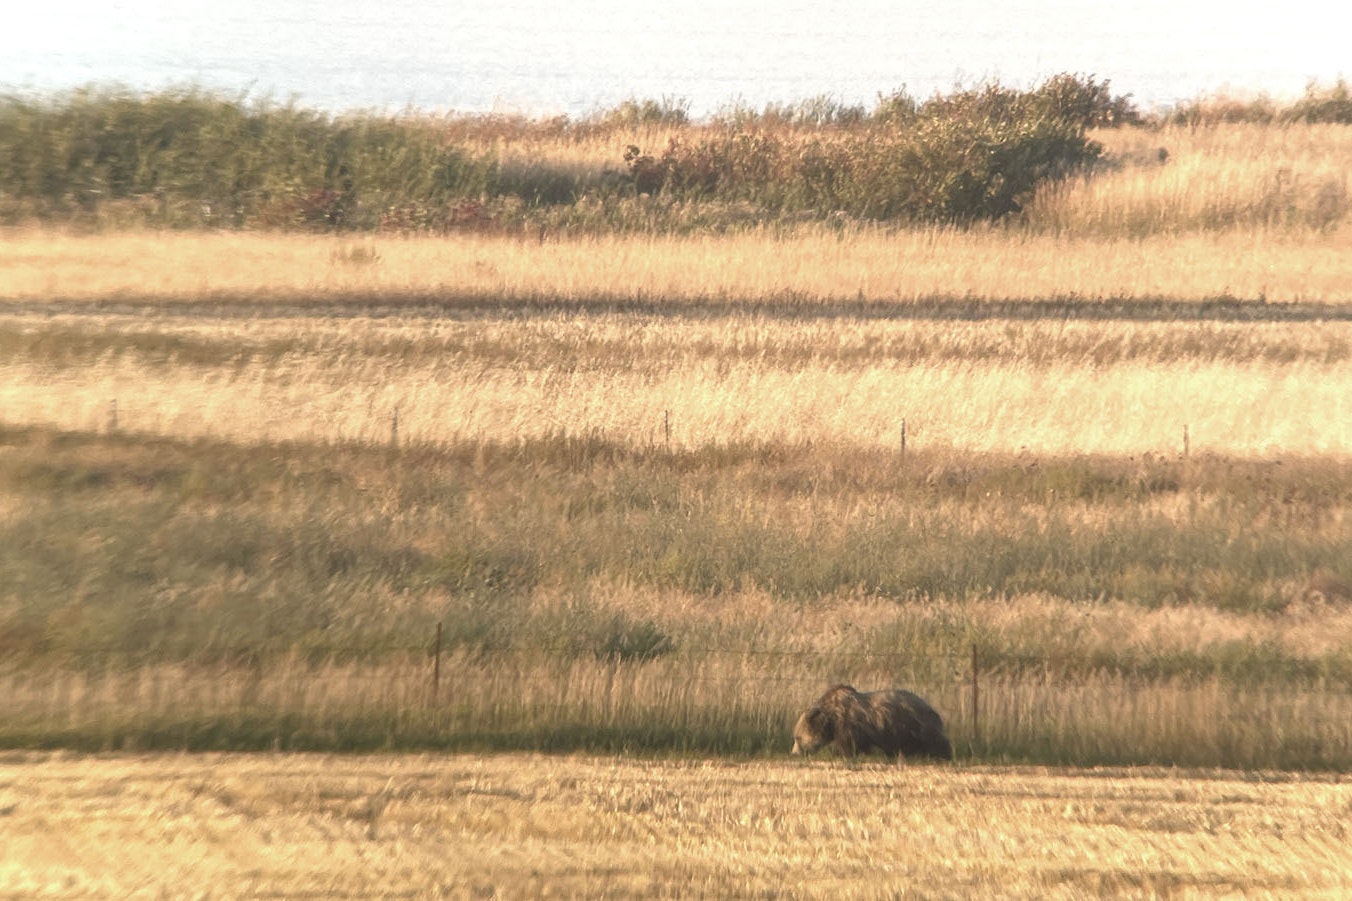 Montana Fish, Wildlife and Parks biologist Brent Lonner saw this grizzly out in prairie country, not far from where a bowhunter had just shot a whitetail buck.